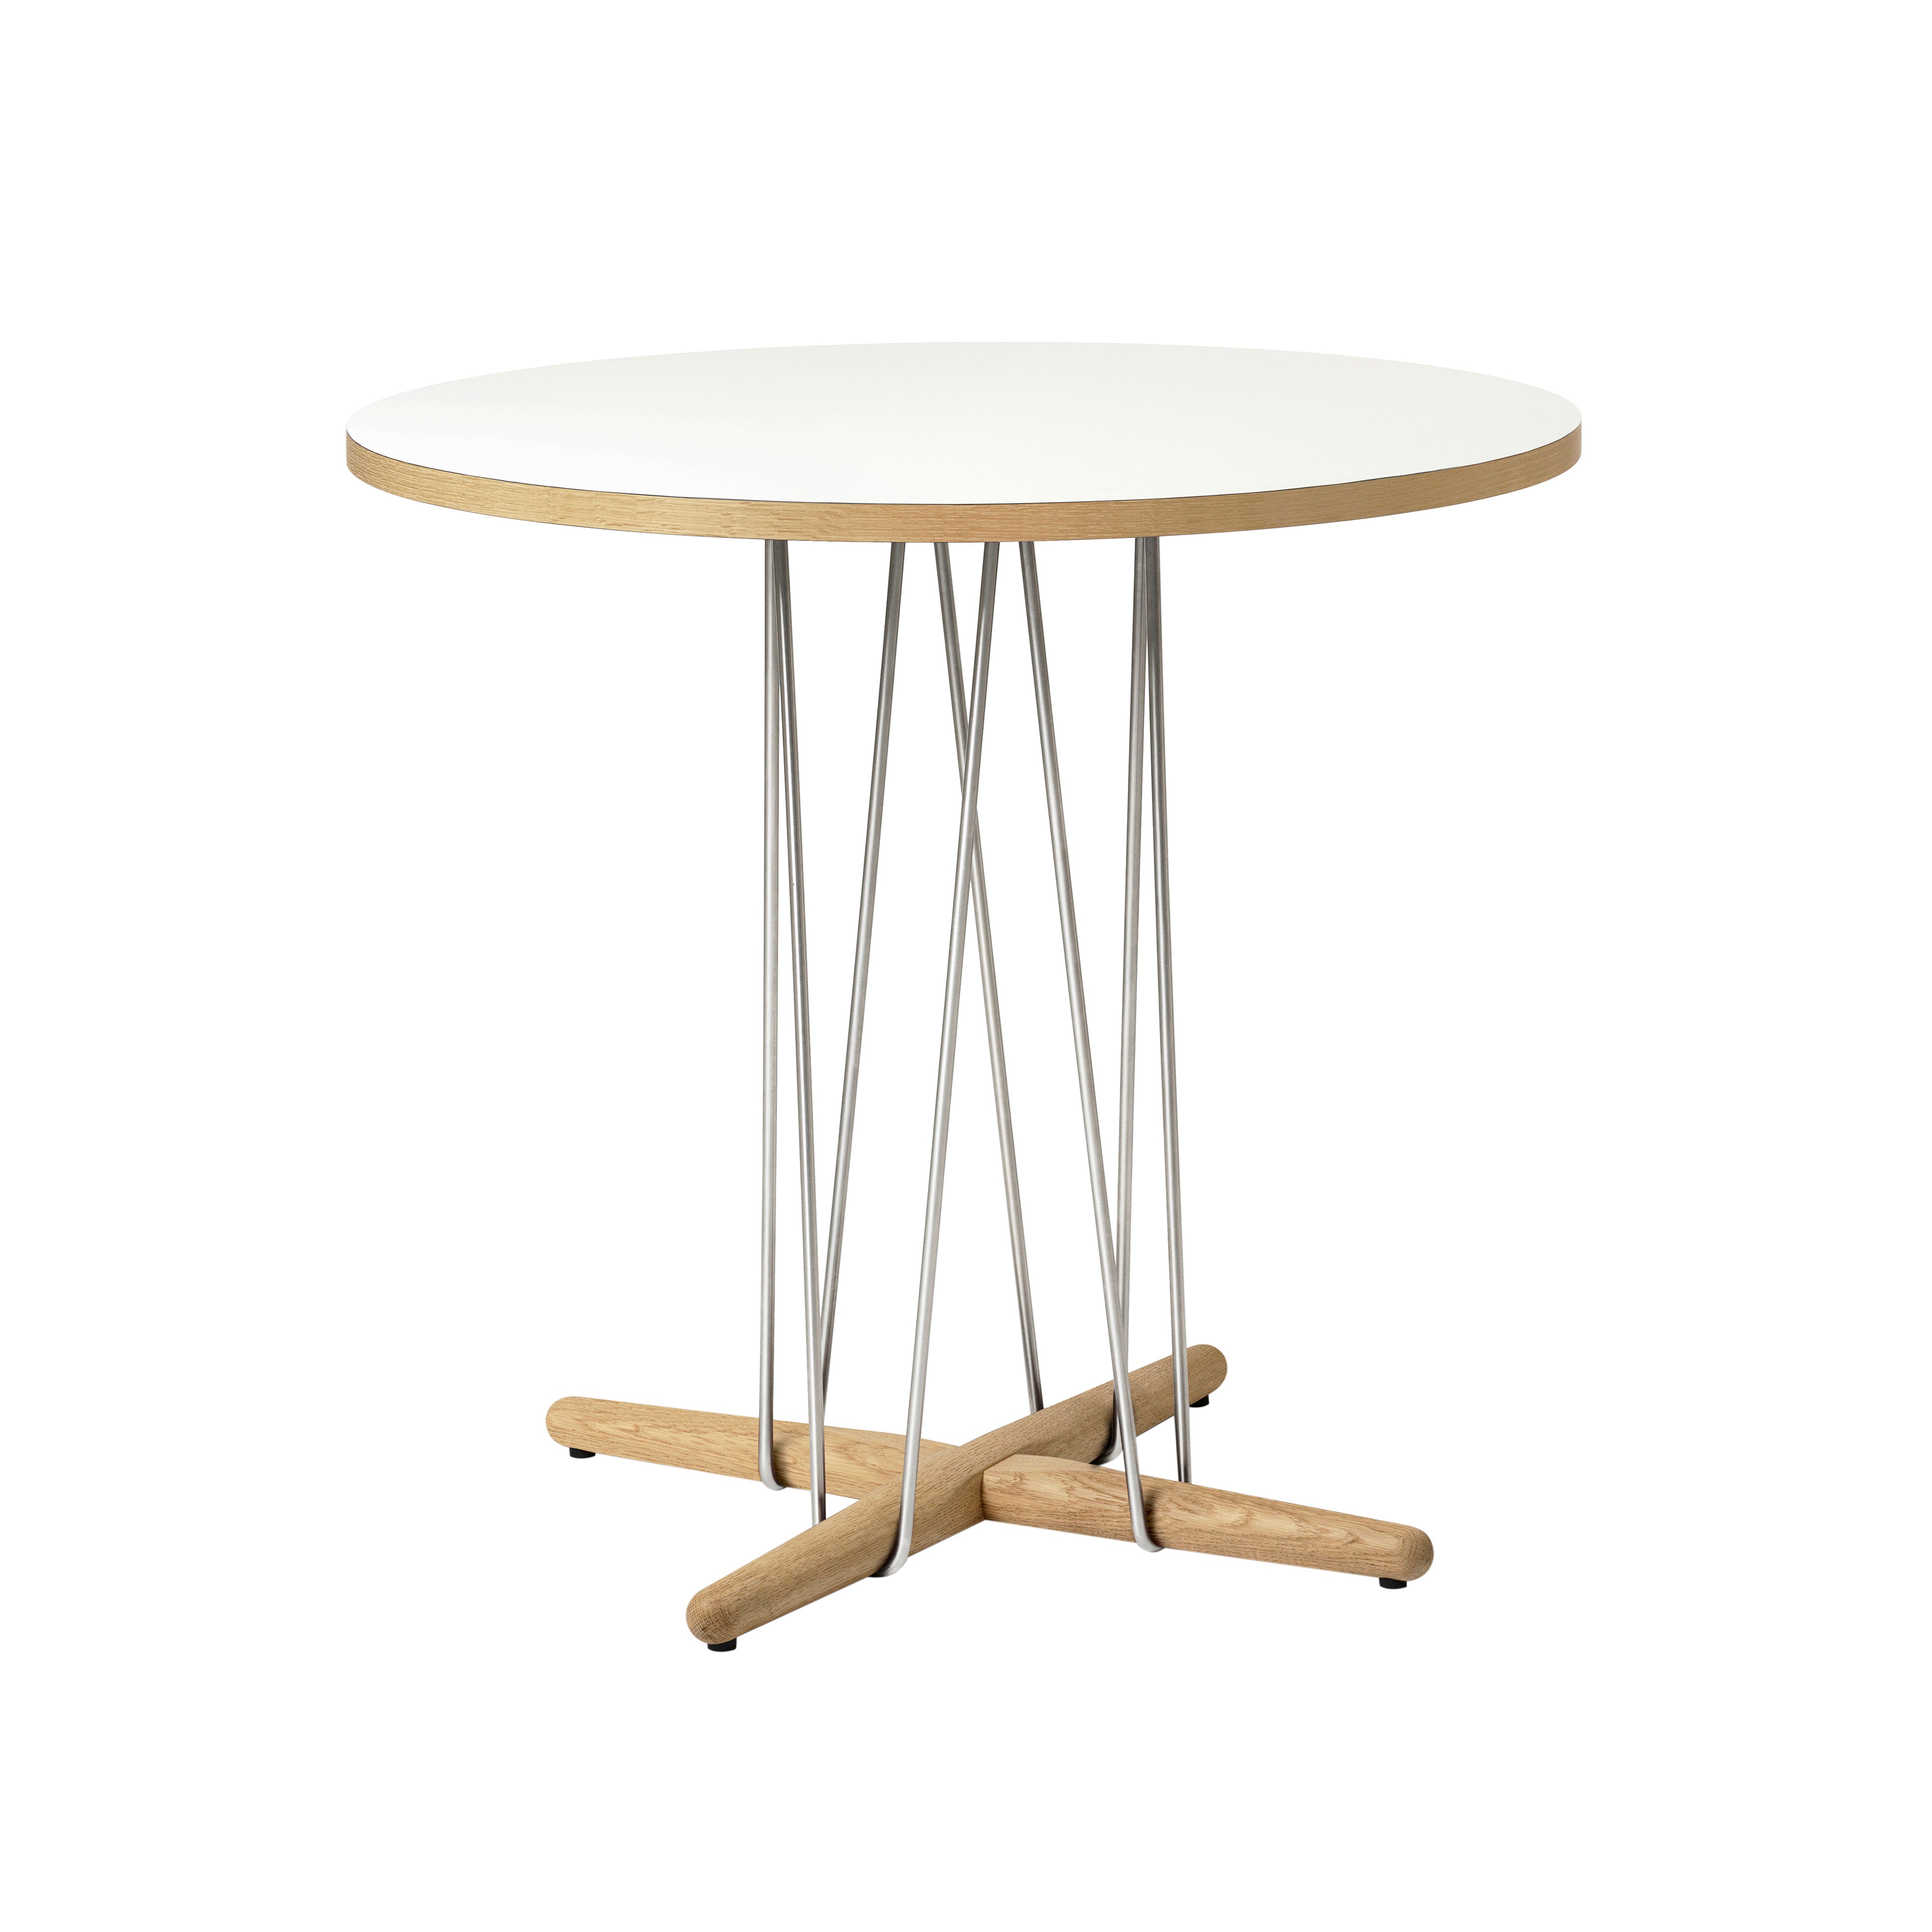 E020 Embrace Table: Stainless Steel + Small - 31.3